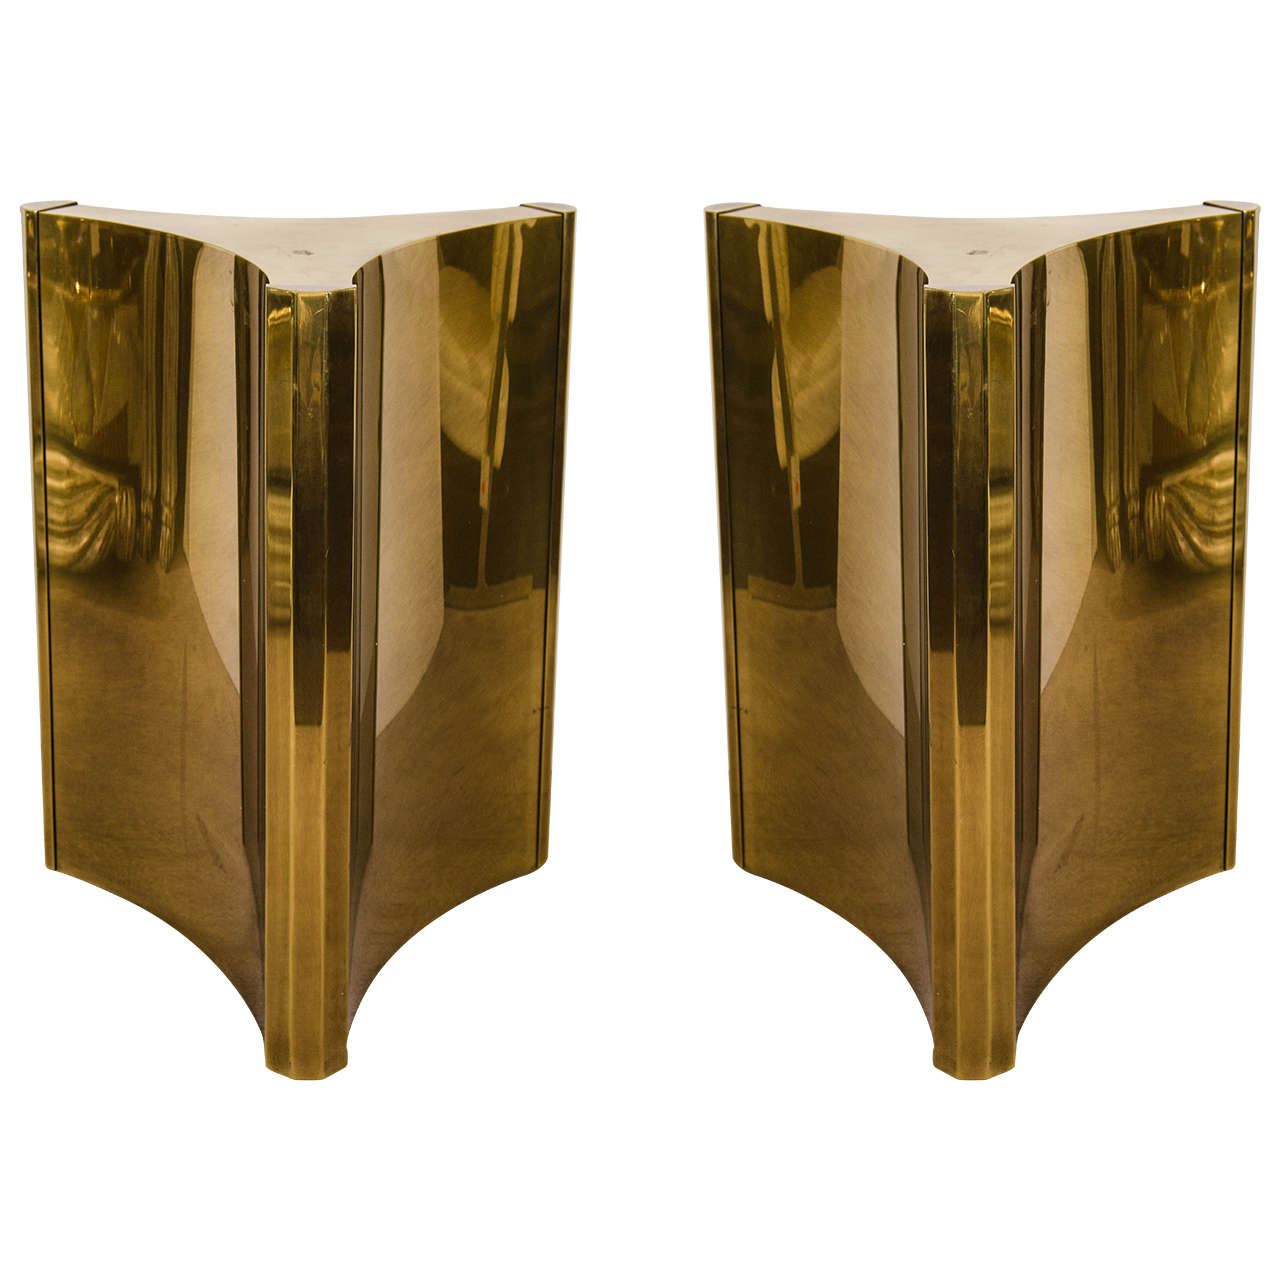 Midcentury Pair of Brass Triangulate Dining Table Bases by Mastercraft